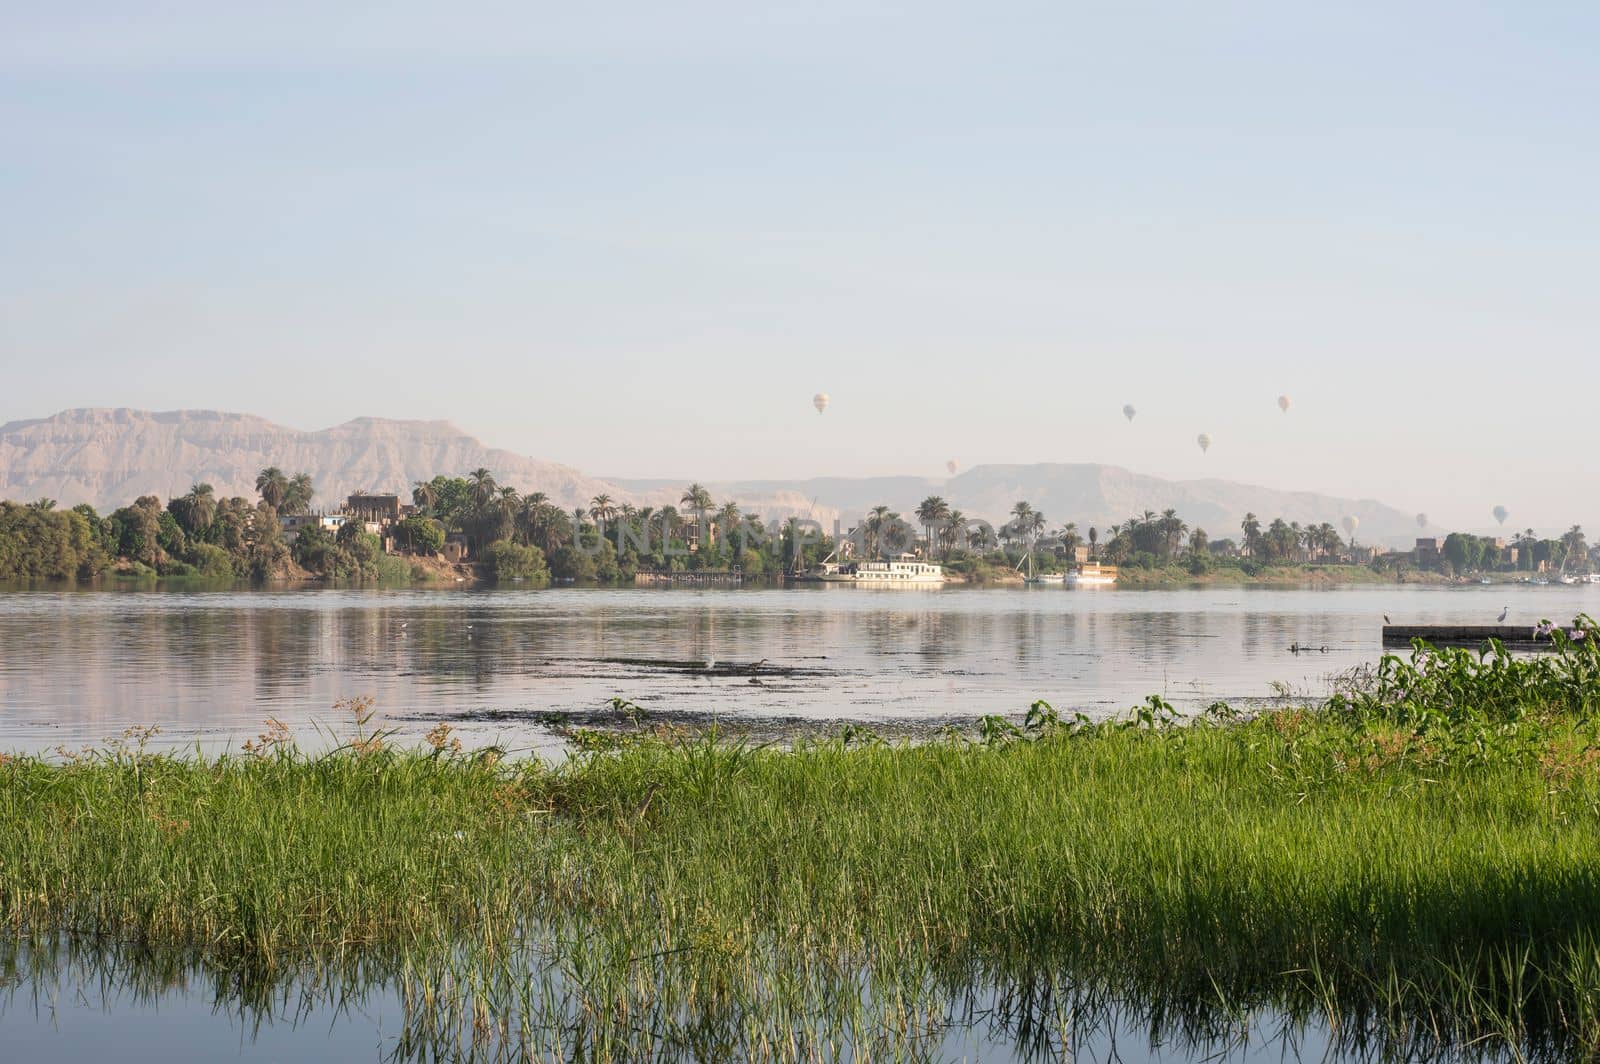 Panoramic landscape view across nile river to luxor west bank with mountains and hot air balloons flying